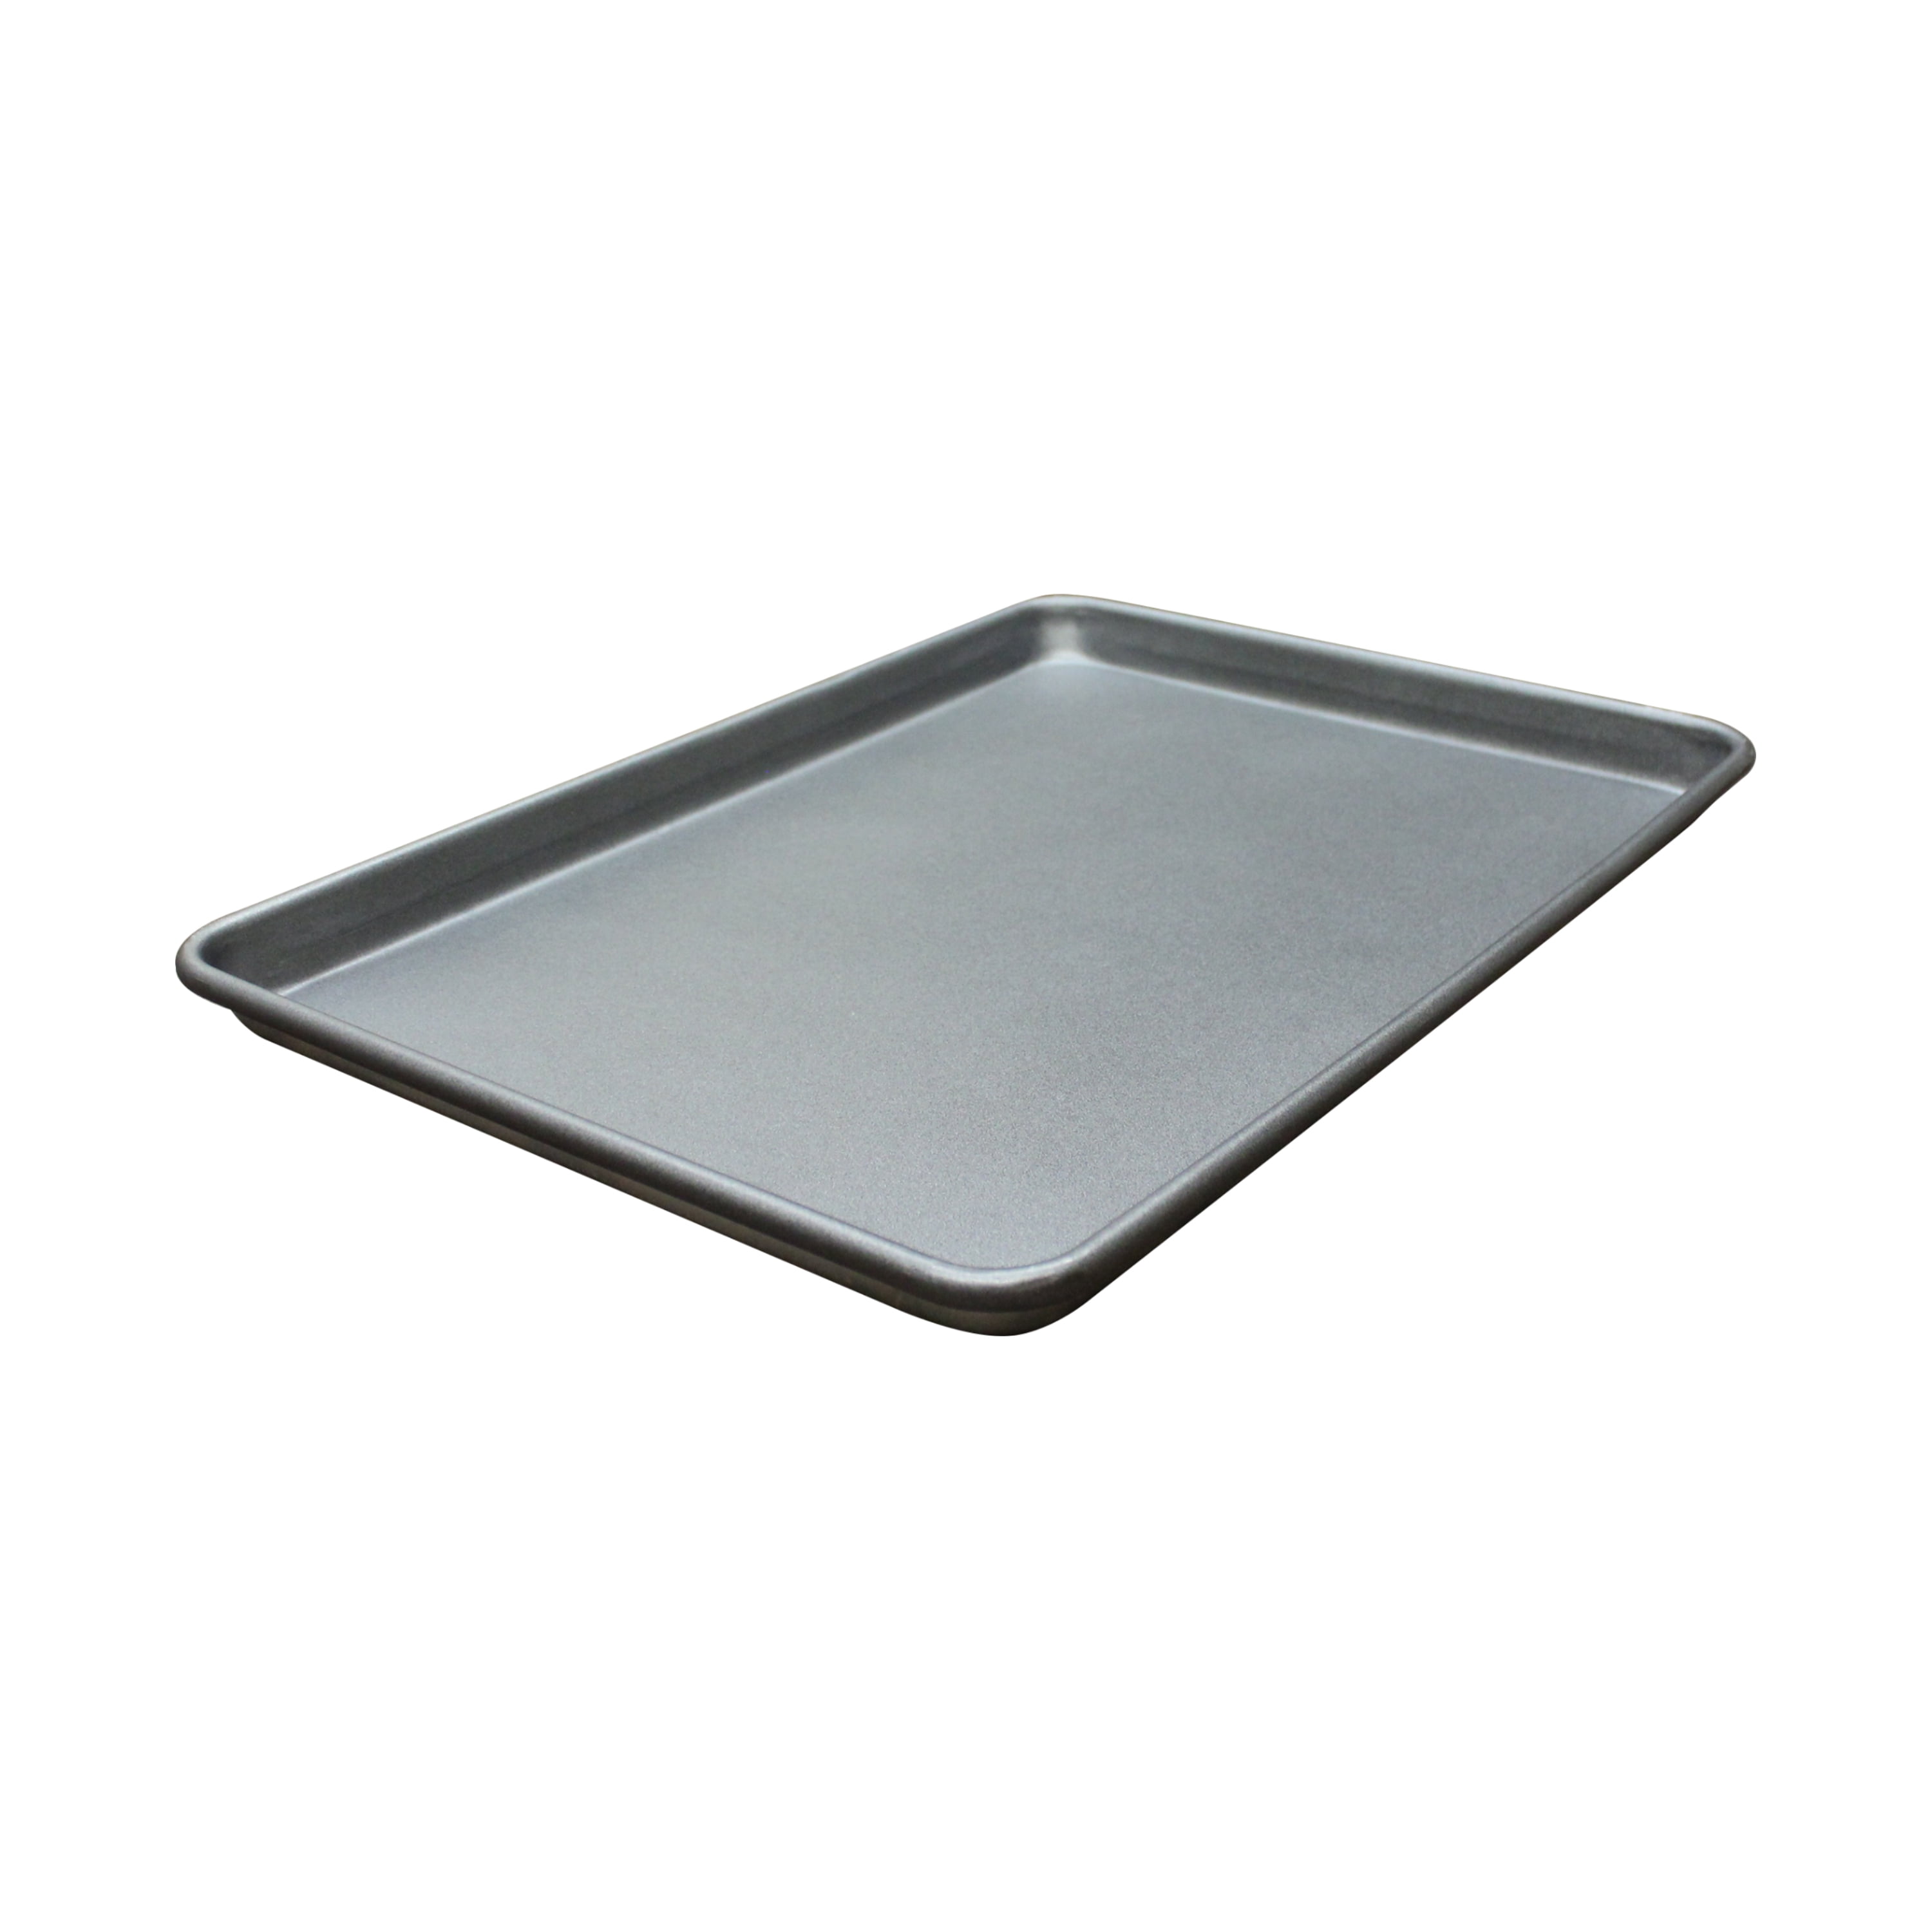  Vollrath Wear-Ever Sheet Pan, 1/2 Size, 18 x 13 x 1-inch,  Aluminum, Perforated: Baking Sheets: Home & Kitchen